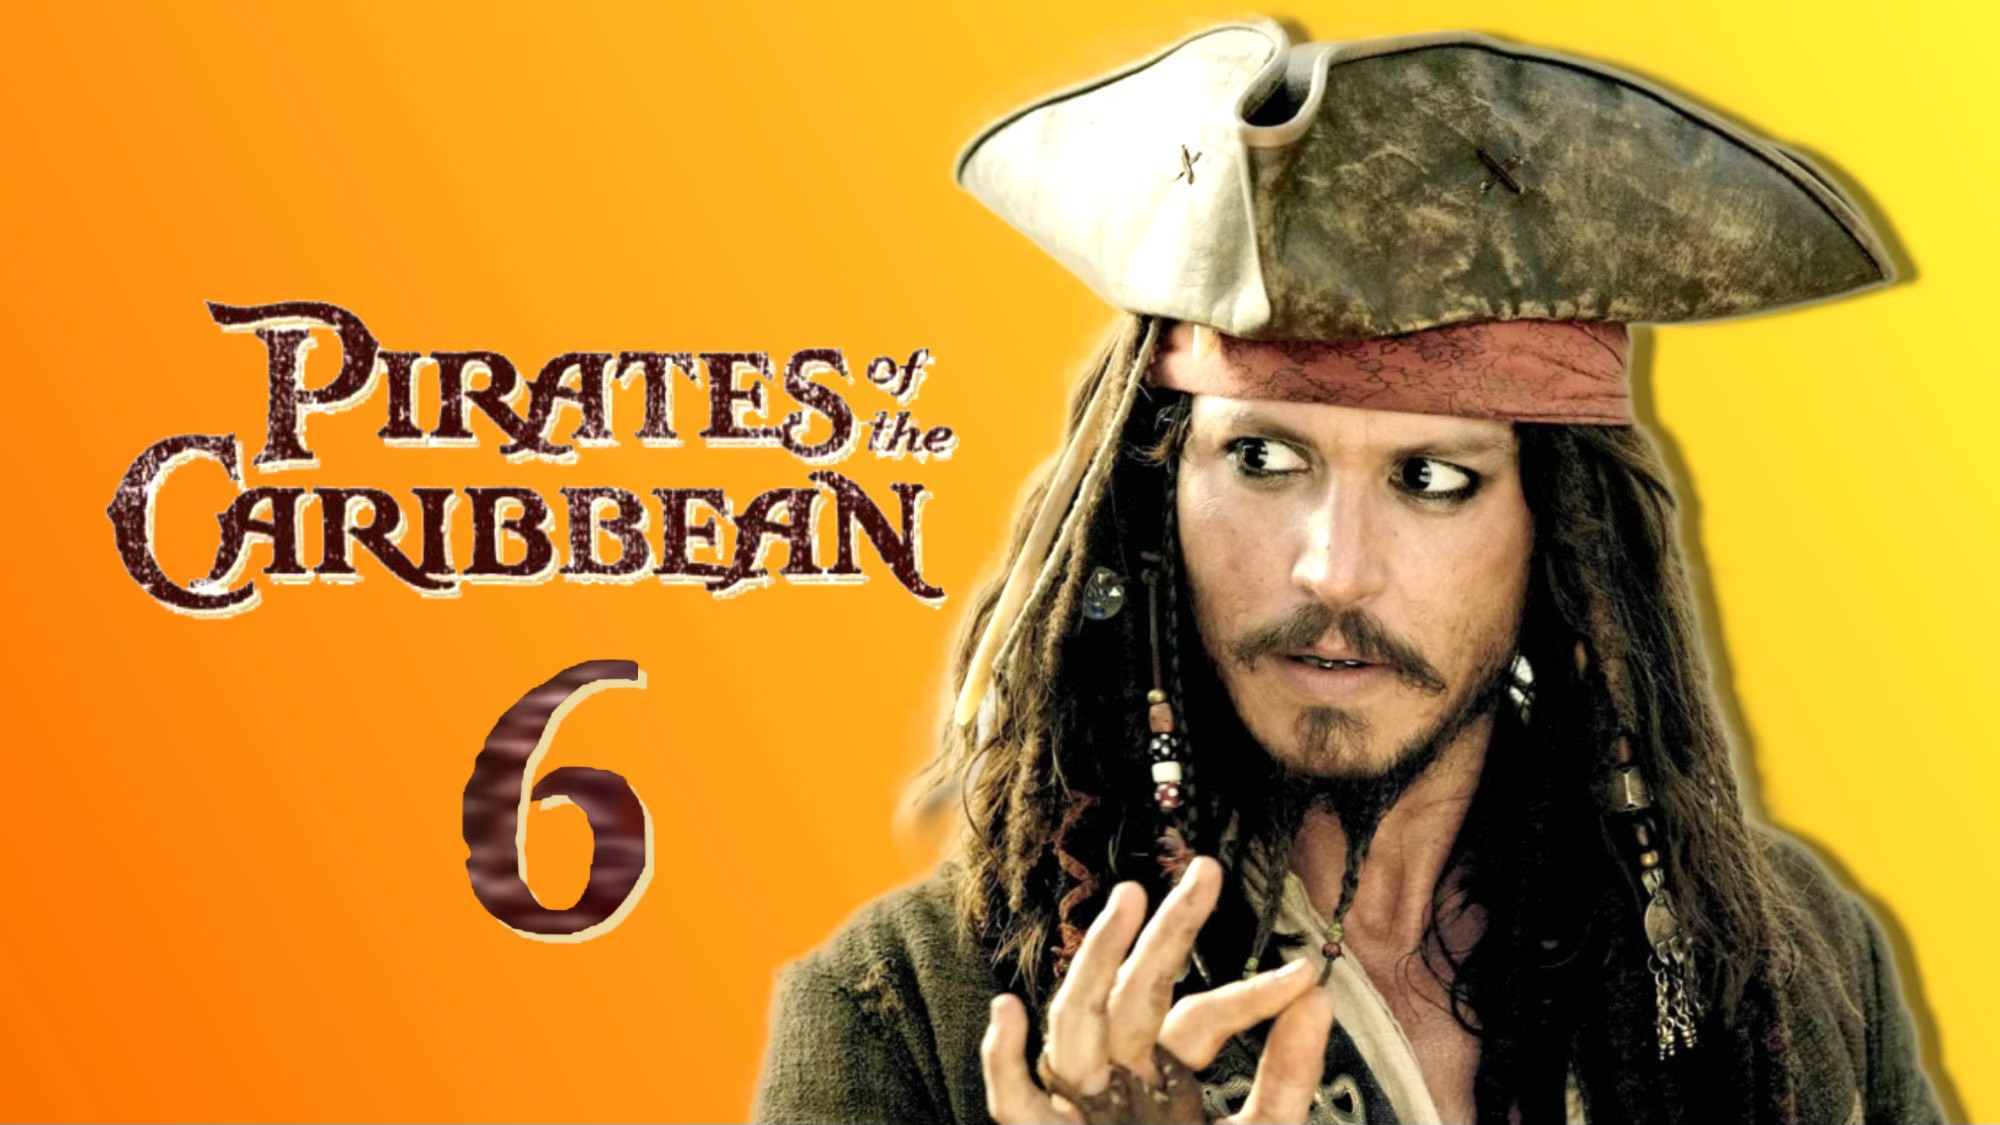 Pirates of the Caribbean without Johnny Depp? What we know about the 6th movie in the saga